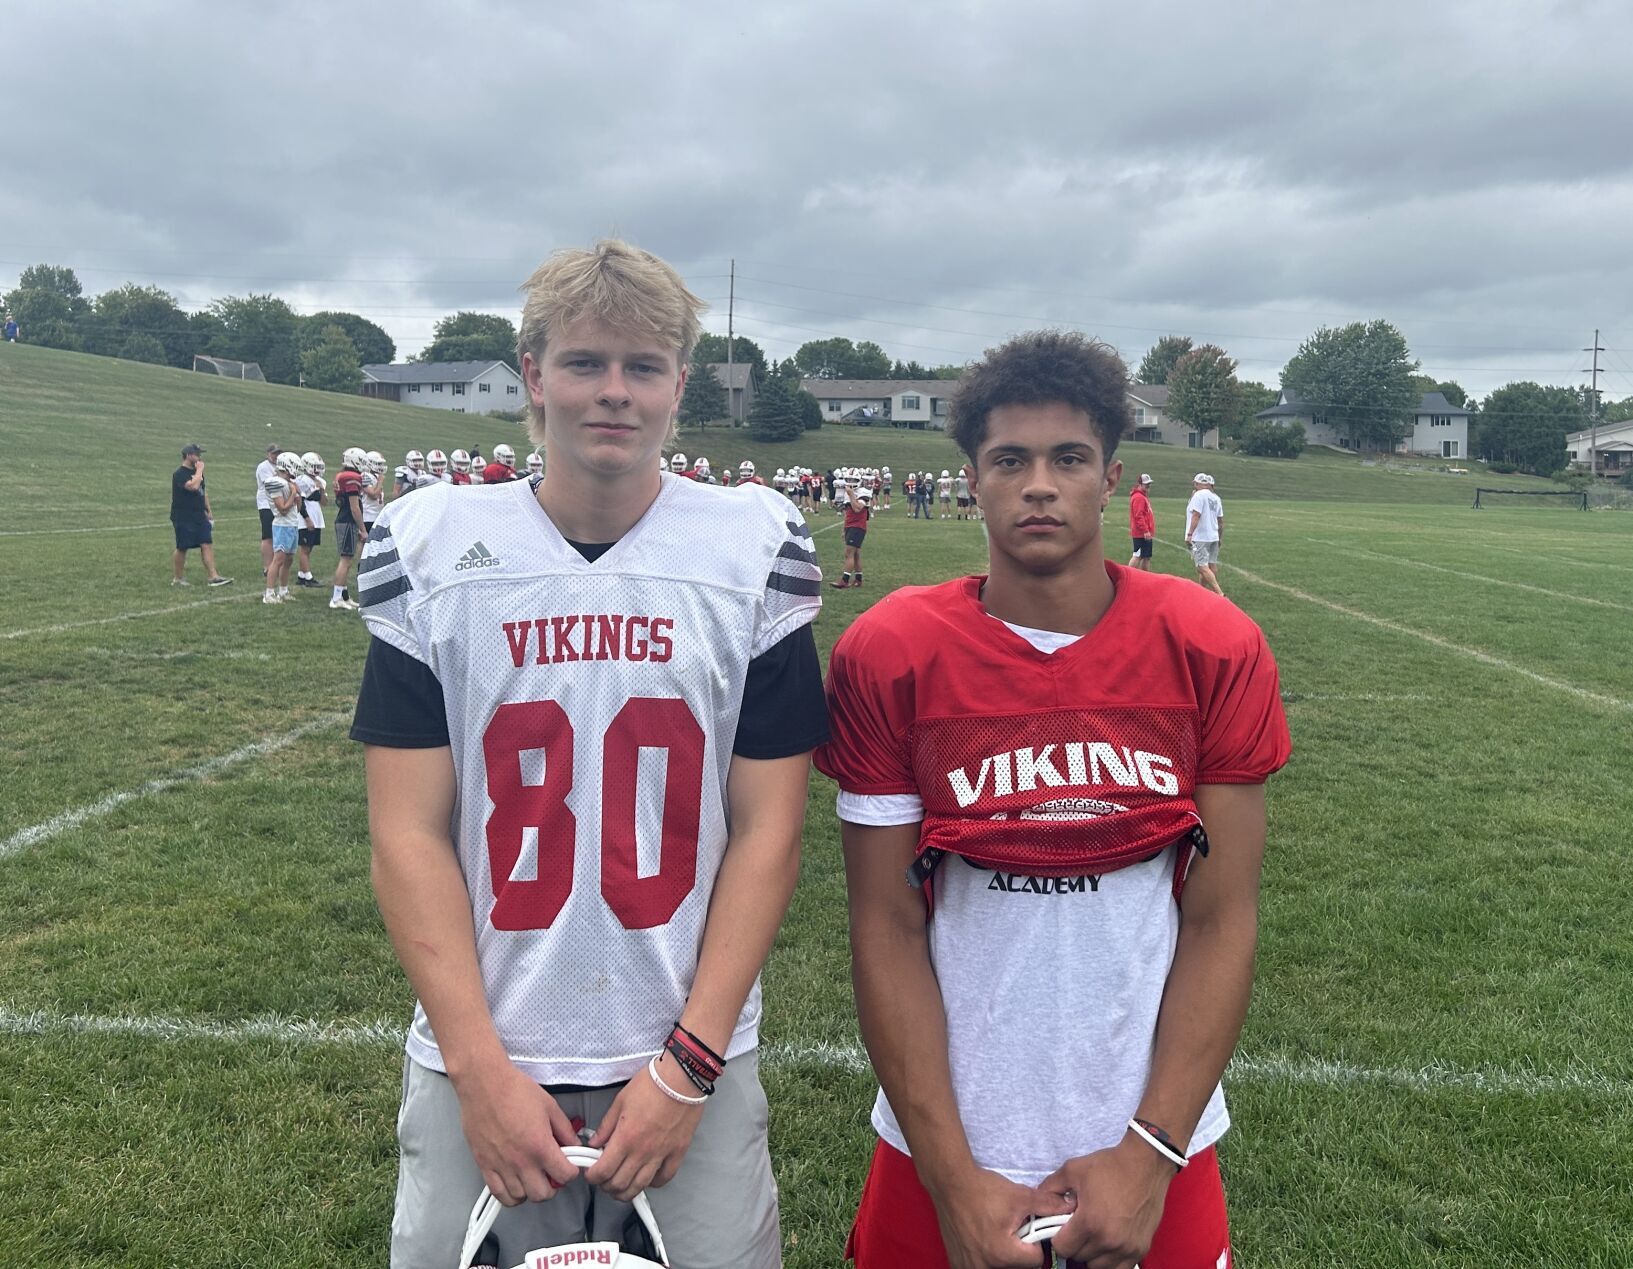 Mount Horeb/Barneveld Cousins Kasey Helgeson and Chris Kiel Leading Unbeaten Start and Hoping for First WIAA State Title